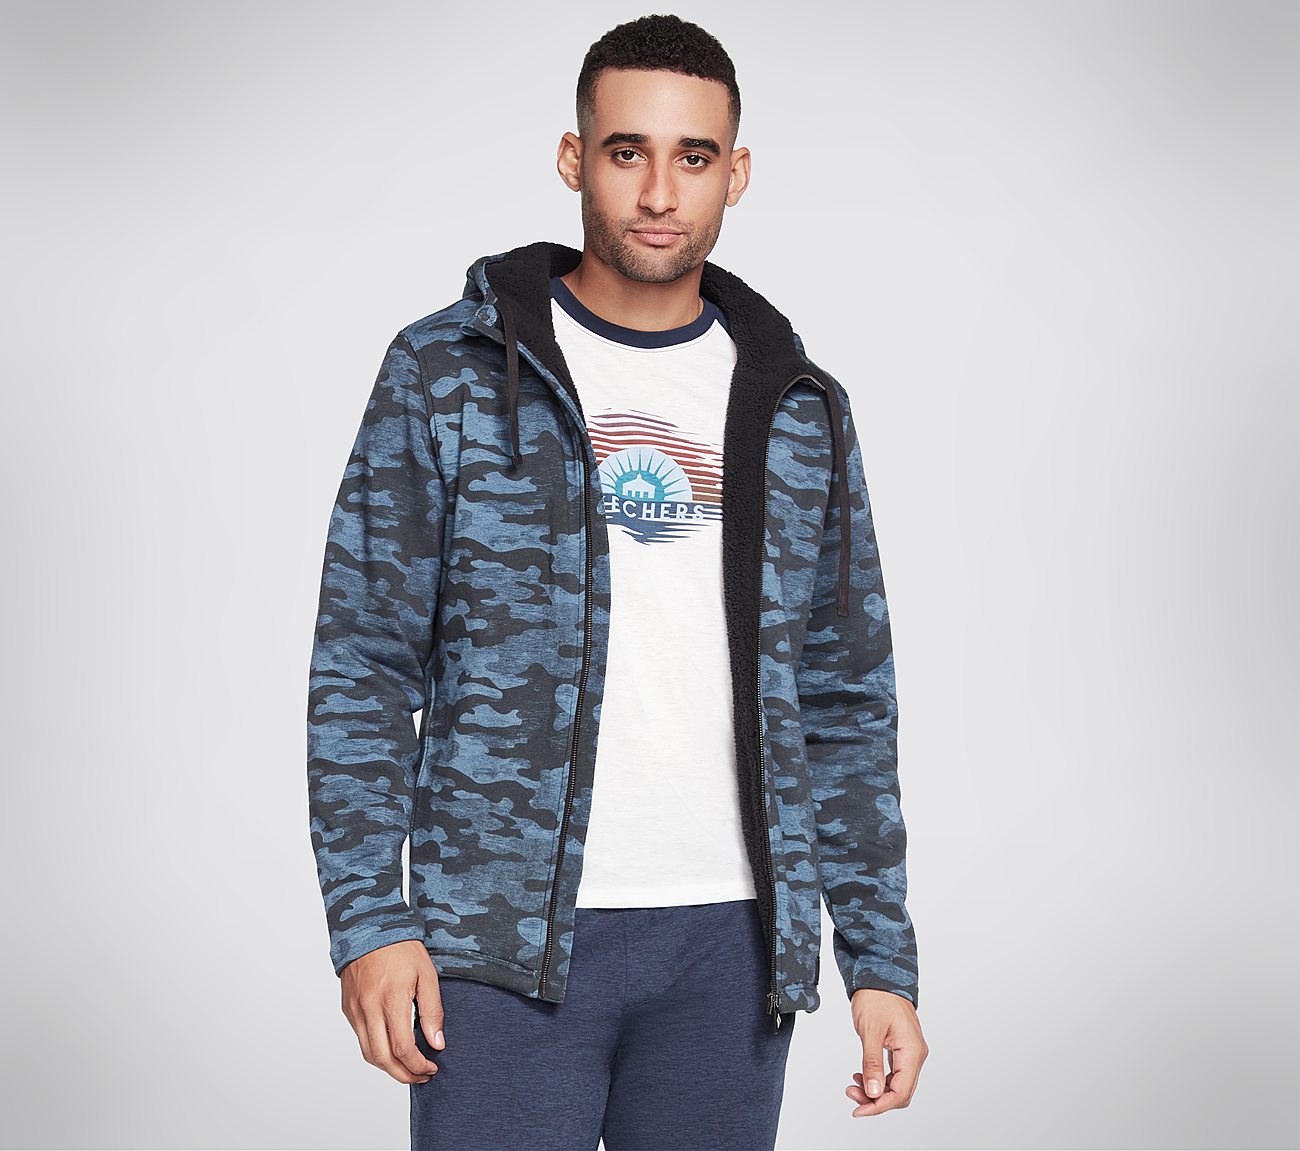 SKECH-SWEATS CAMO LOUNGE SHER, NAVY/MULTI Apparel Lateral View